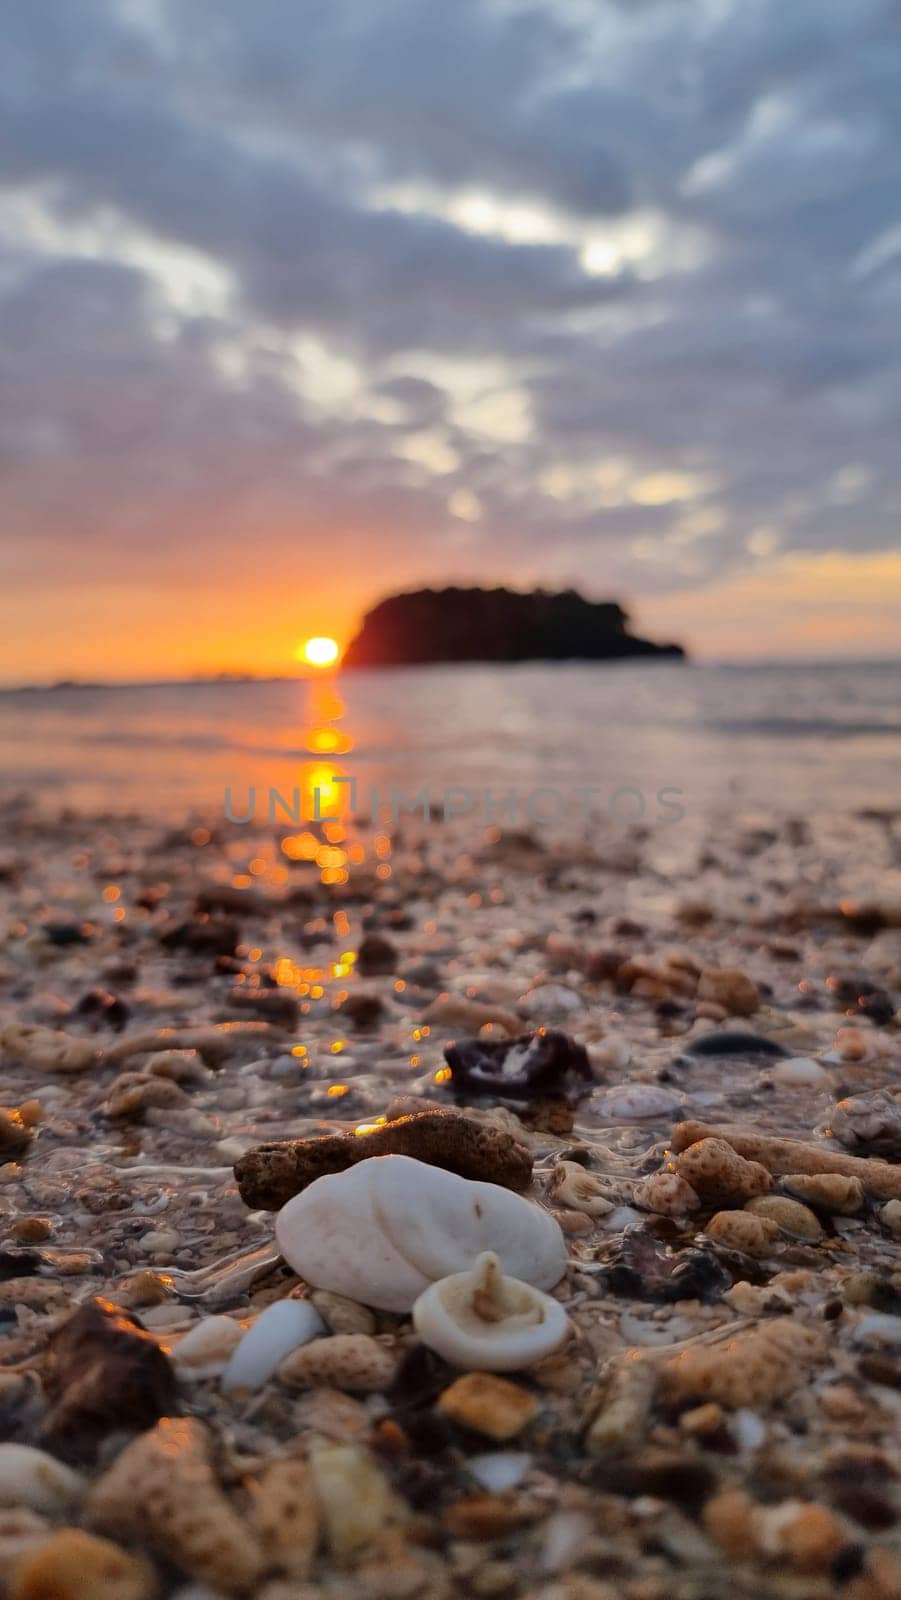 The sun sets gracefully over the calm ocean, casting a warm glow on the sandy beach scattered with beautiful shells by fokkebok